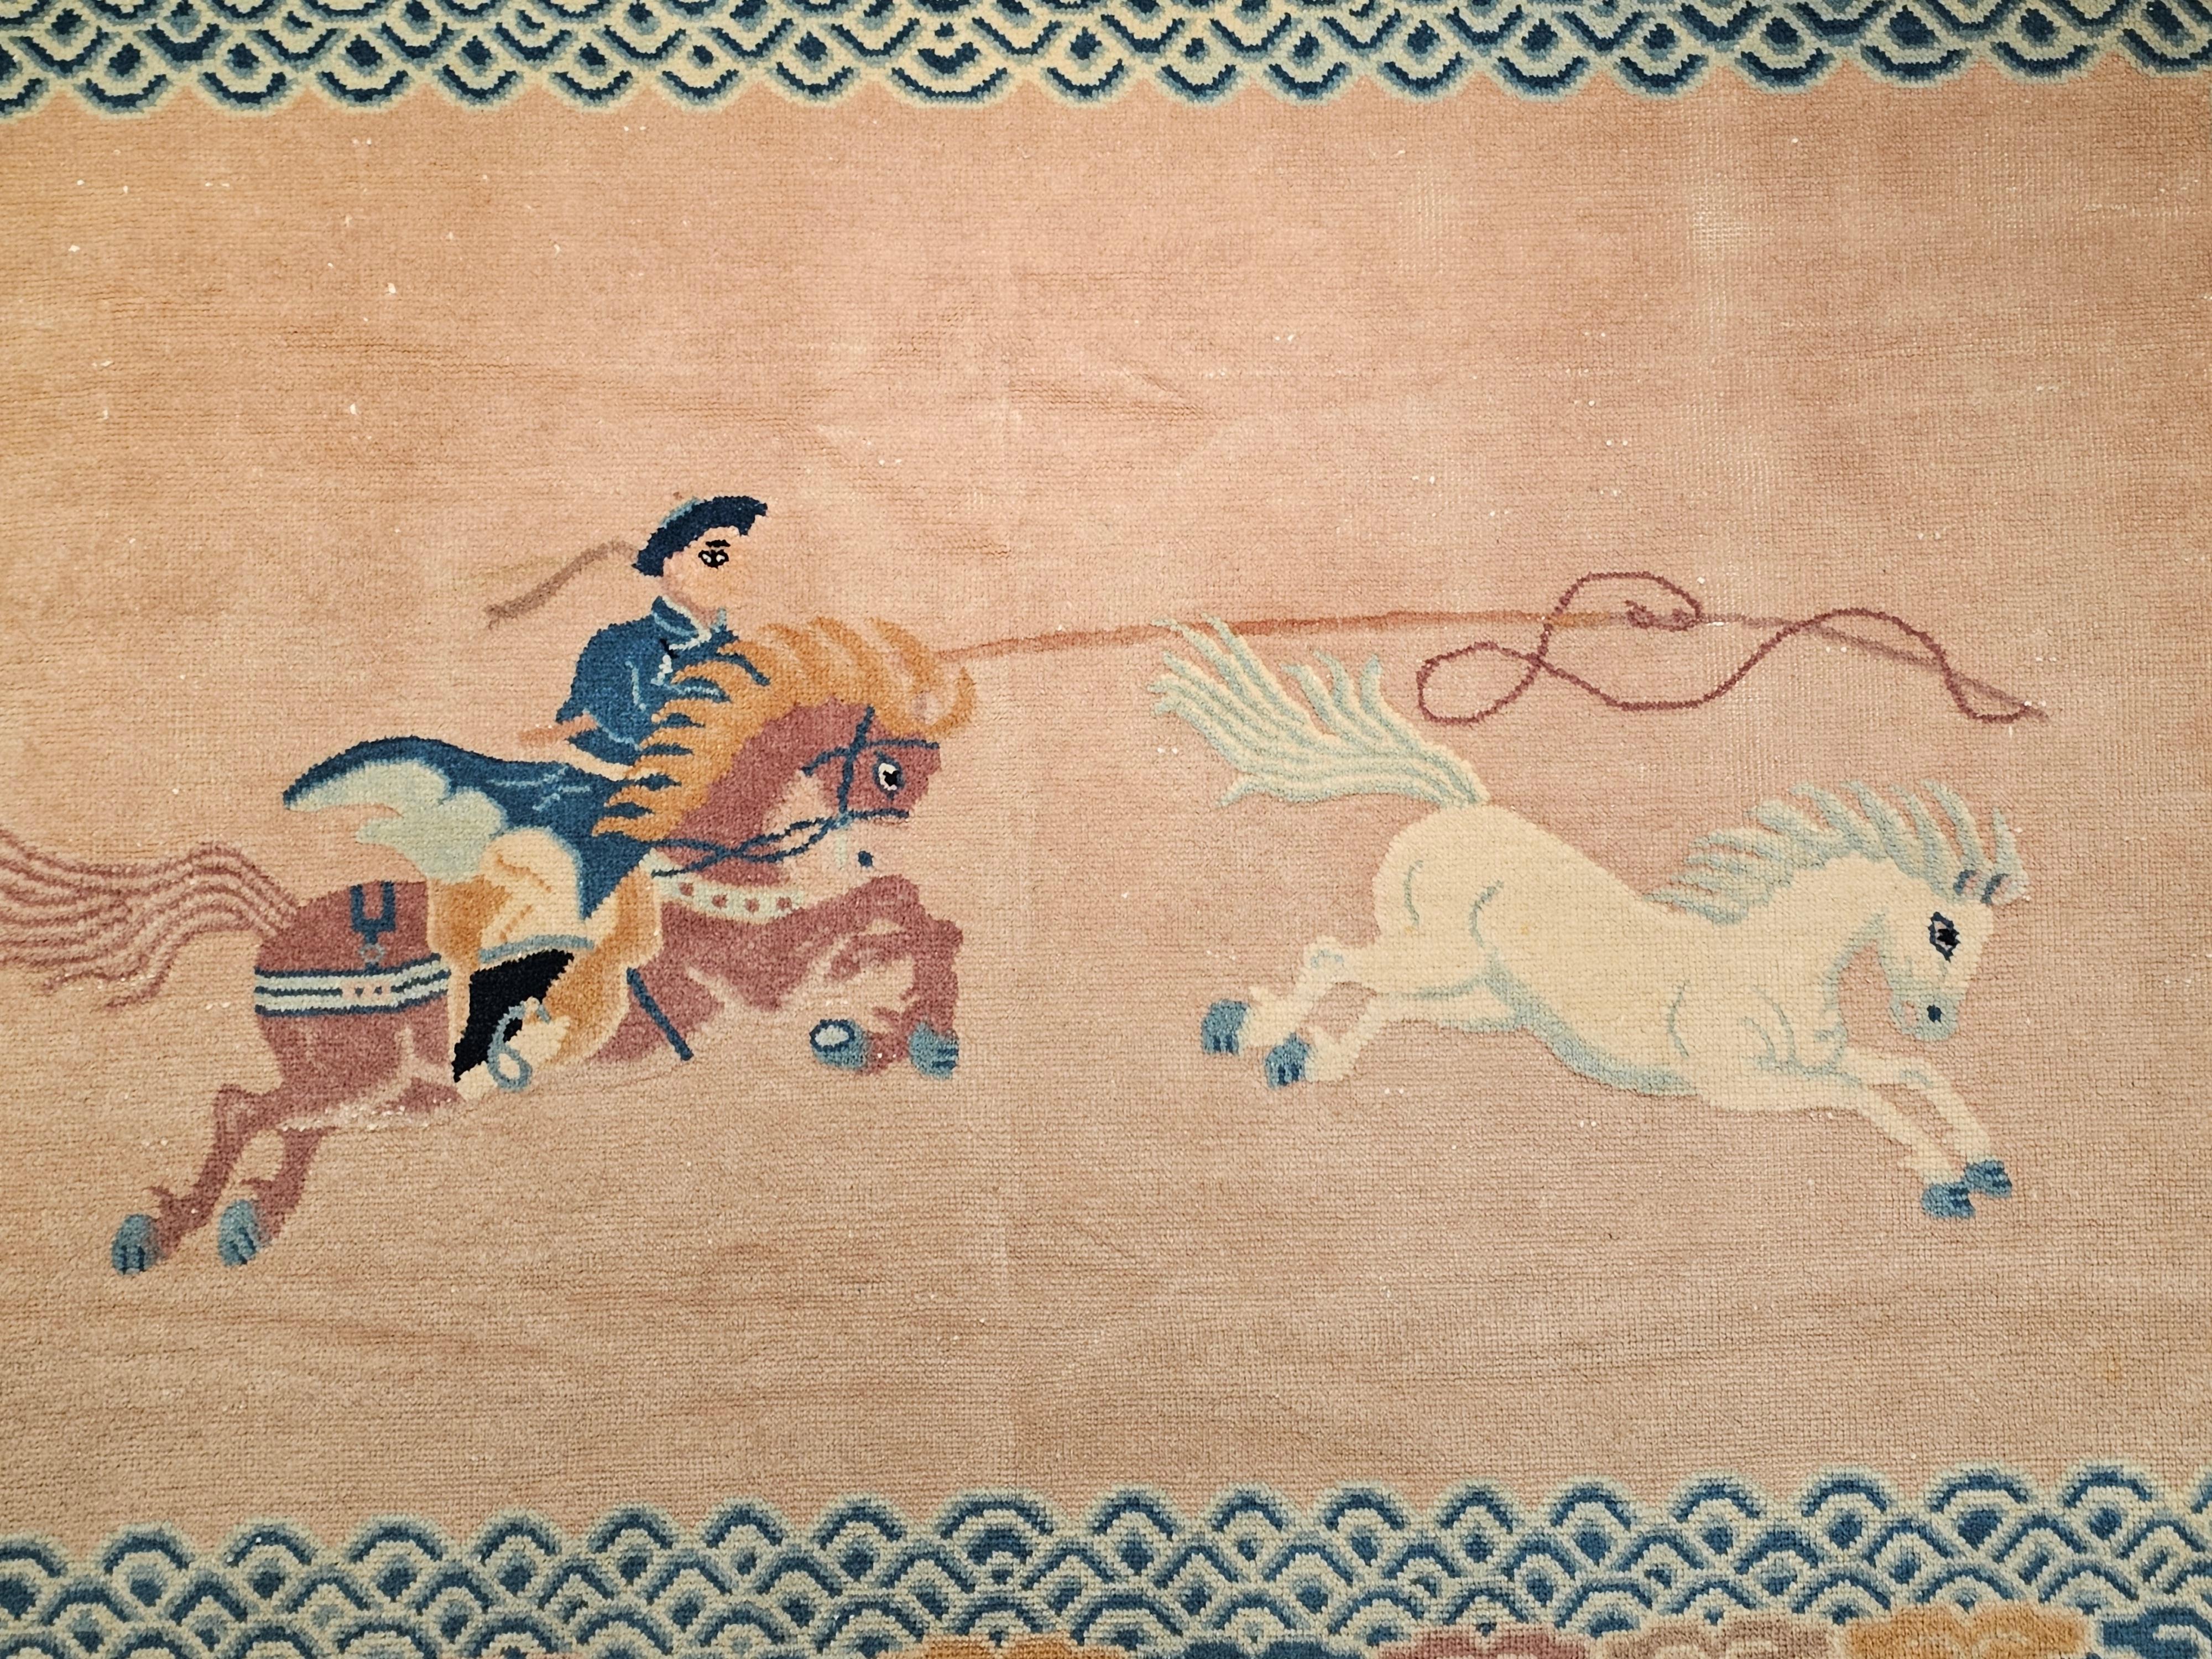 Hand-Woven Vintage Chinese Pictorial Rug of a Riding Horseman in Pale Peach/Pink, Baby Blue For Sale